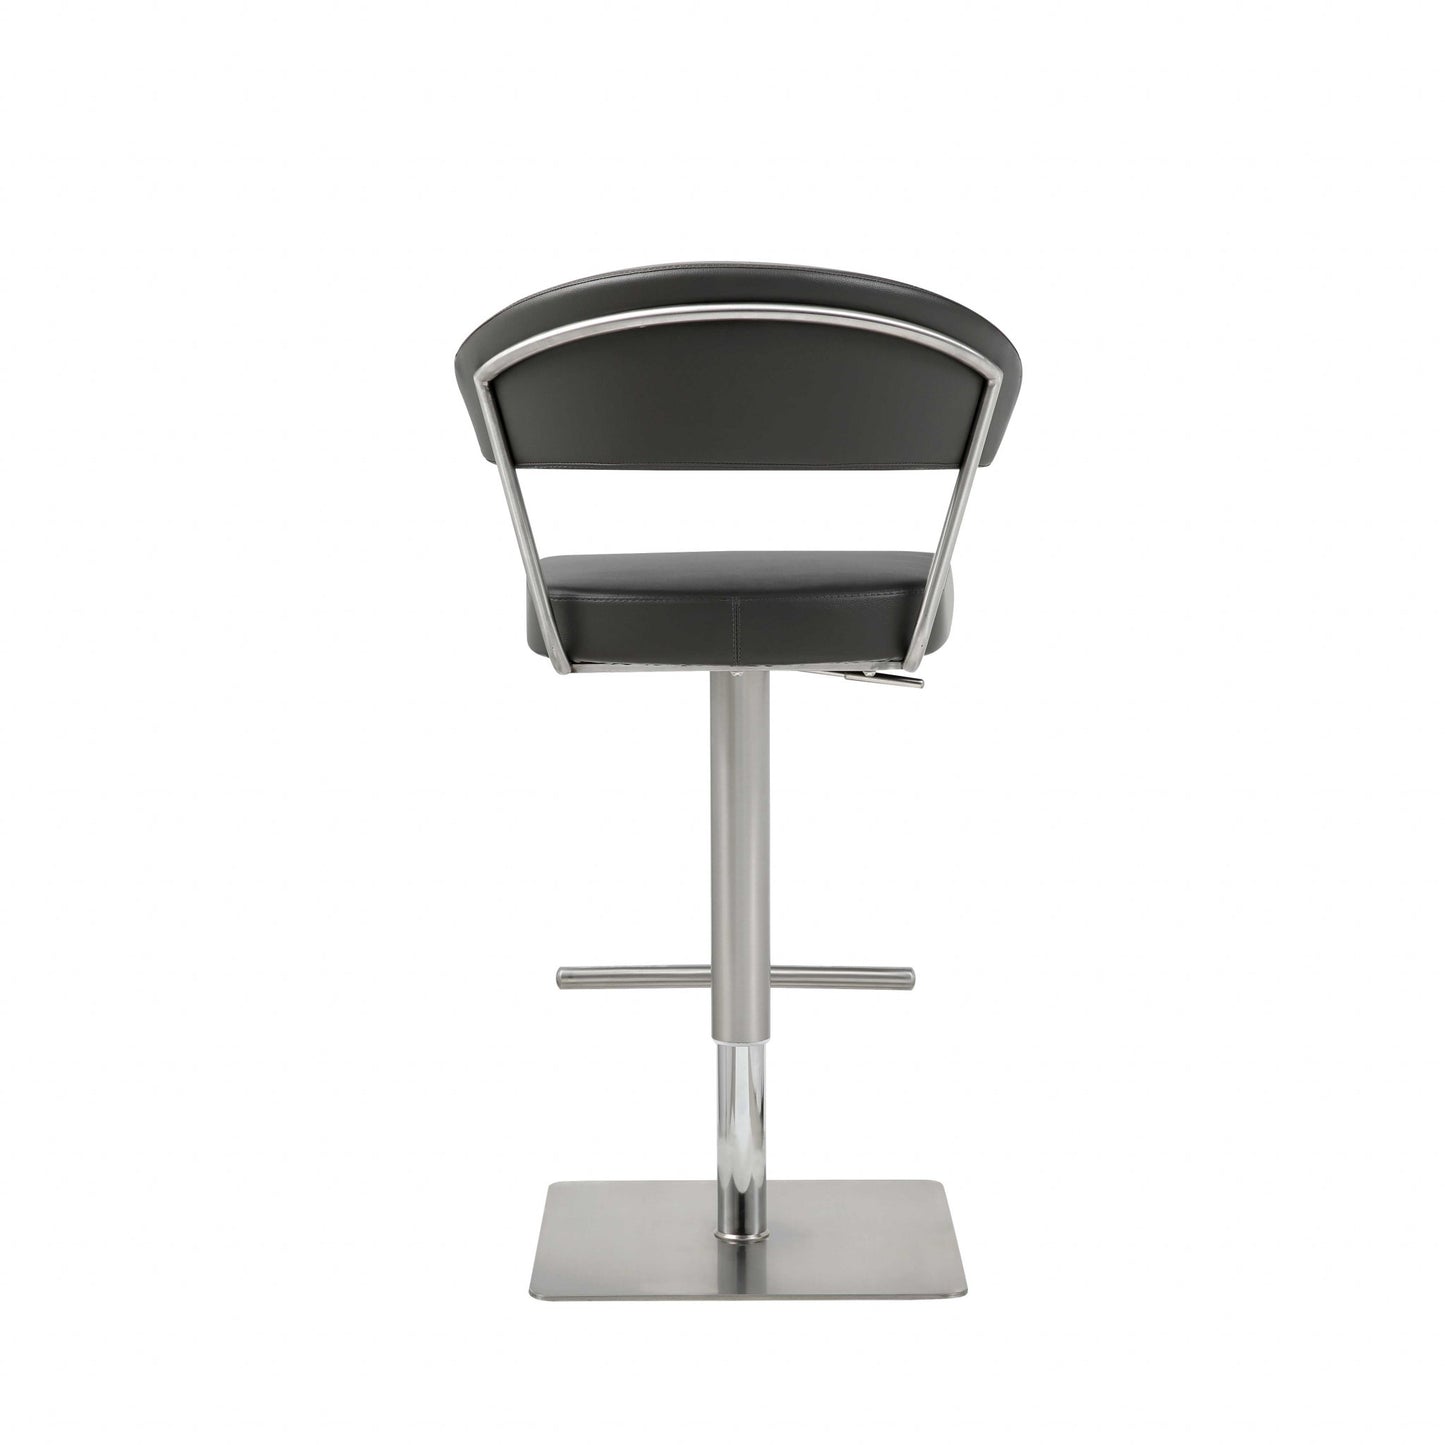 34" Black And Silver Stainless Steel Chair With Footrest